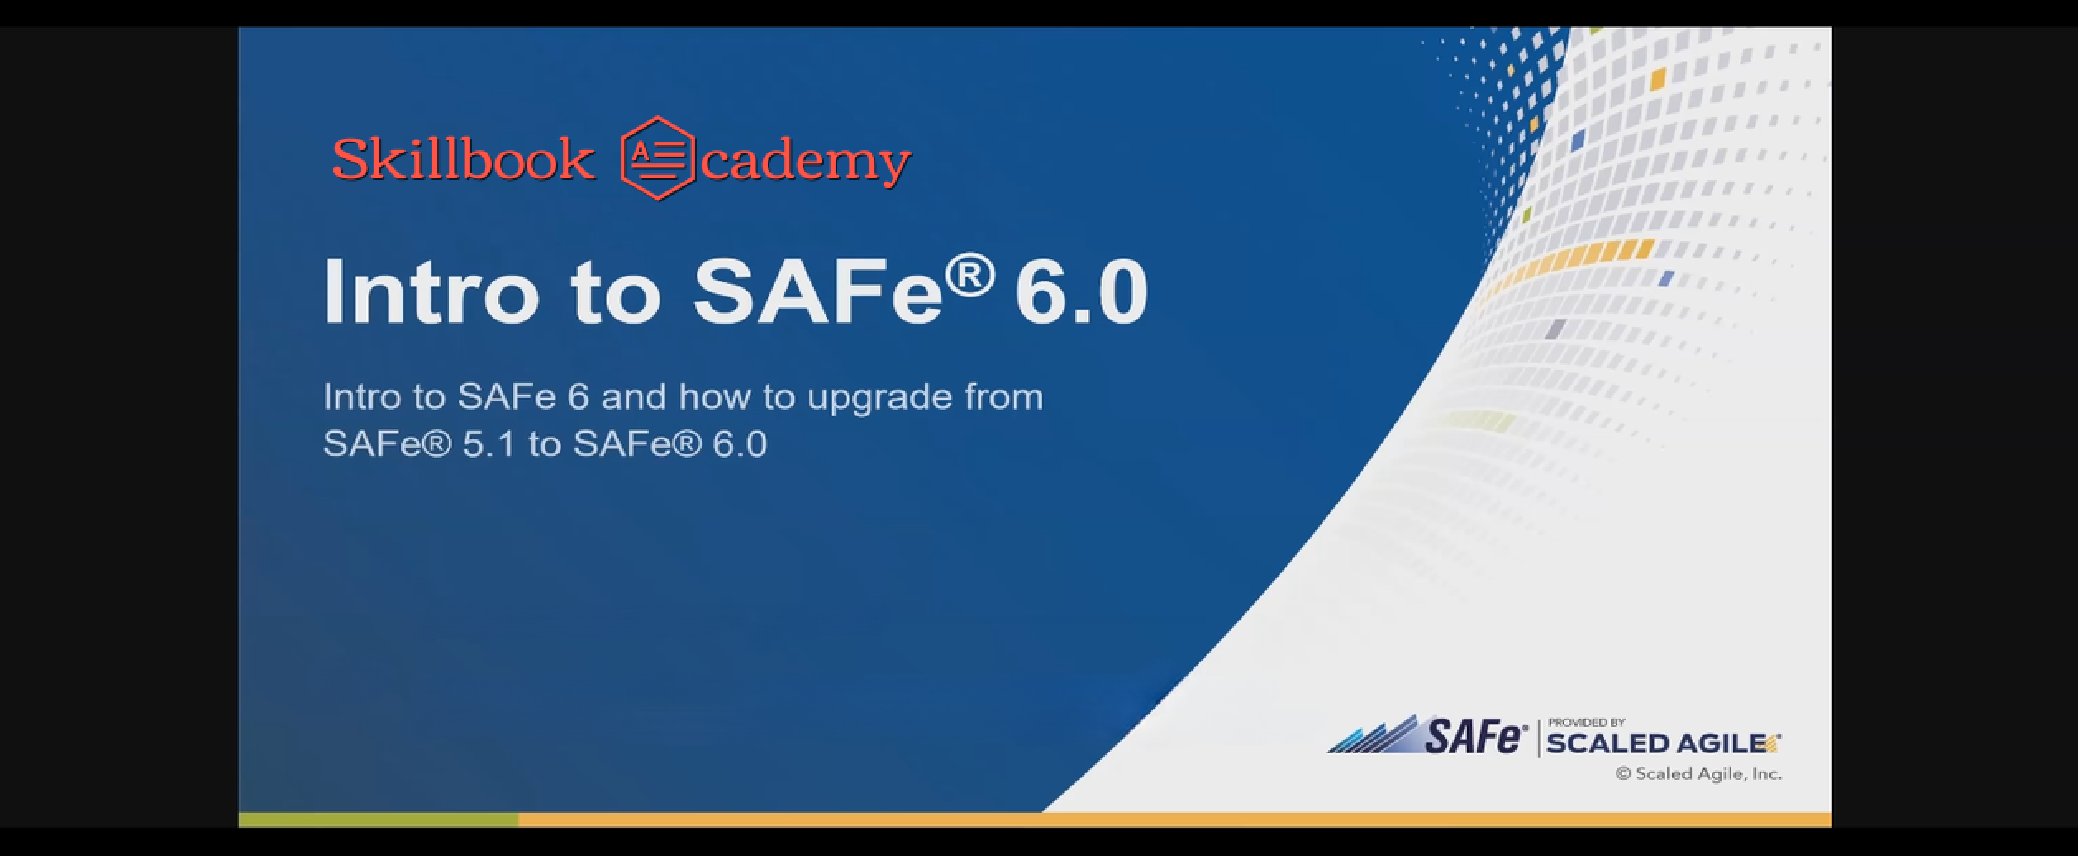 What to Expect When Upgrading to SAFe® 6.0